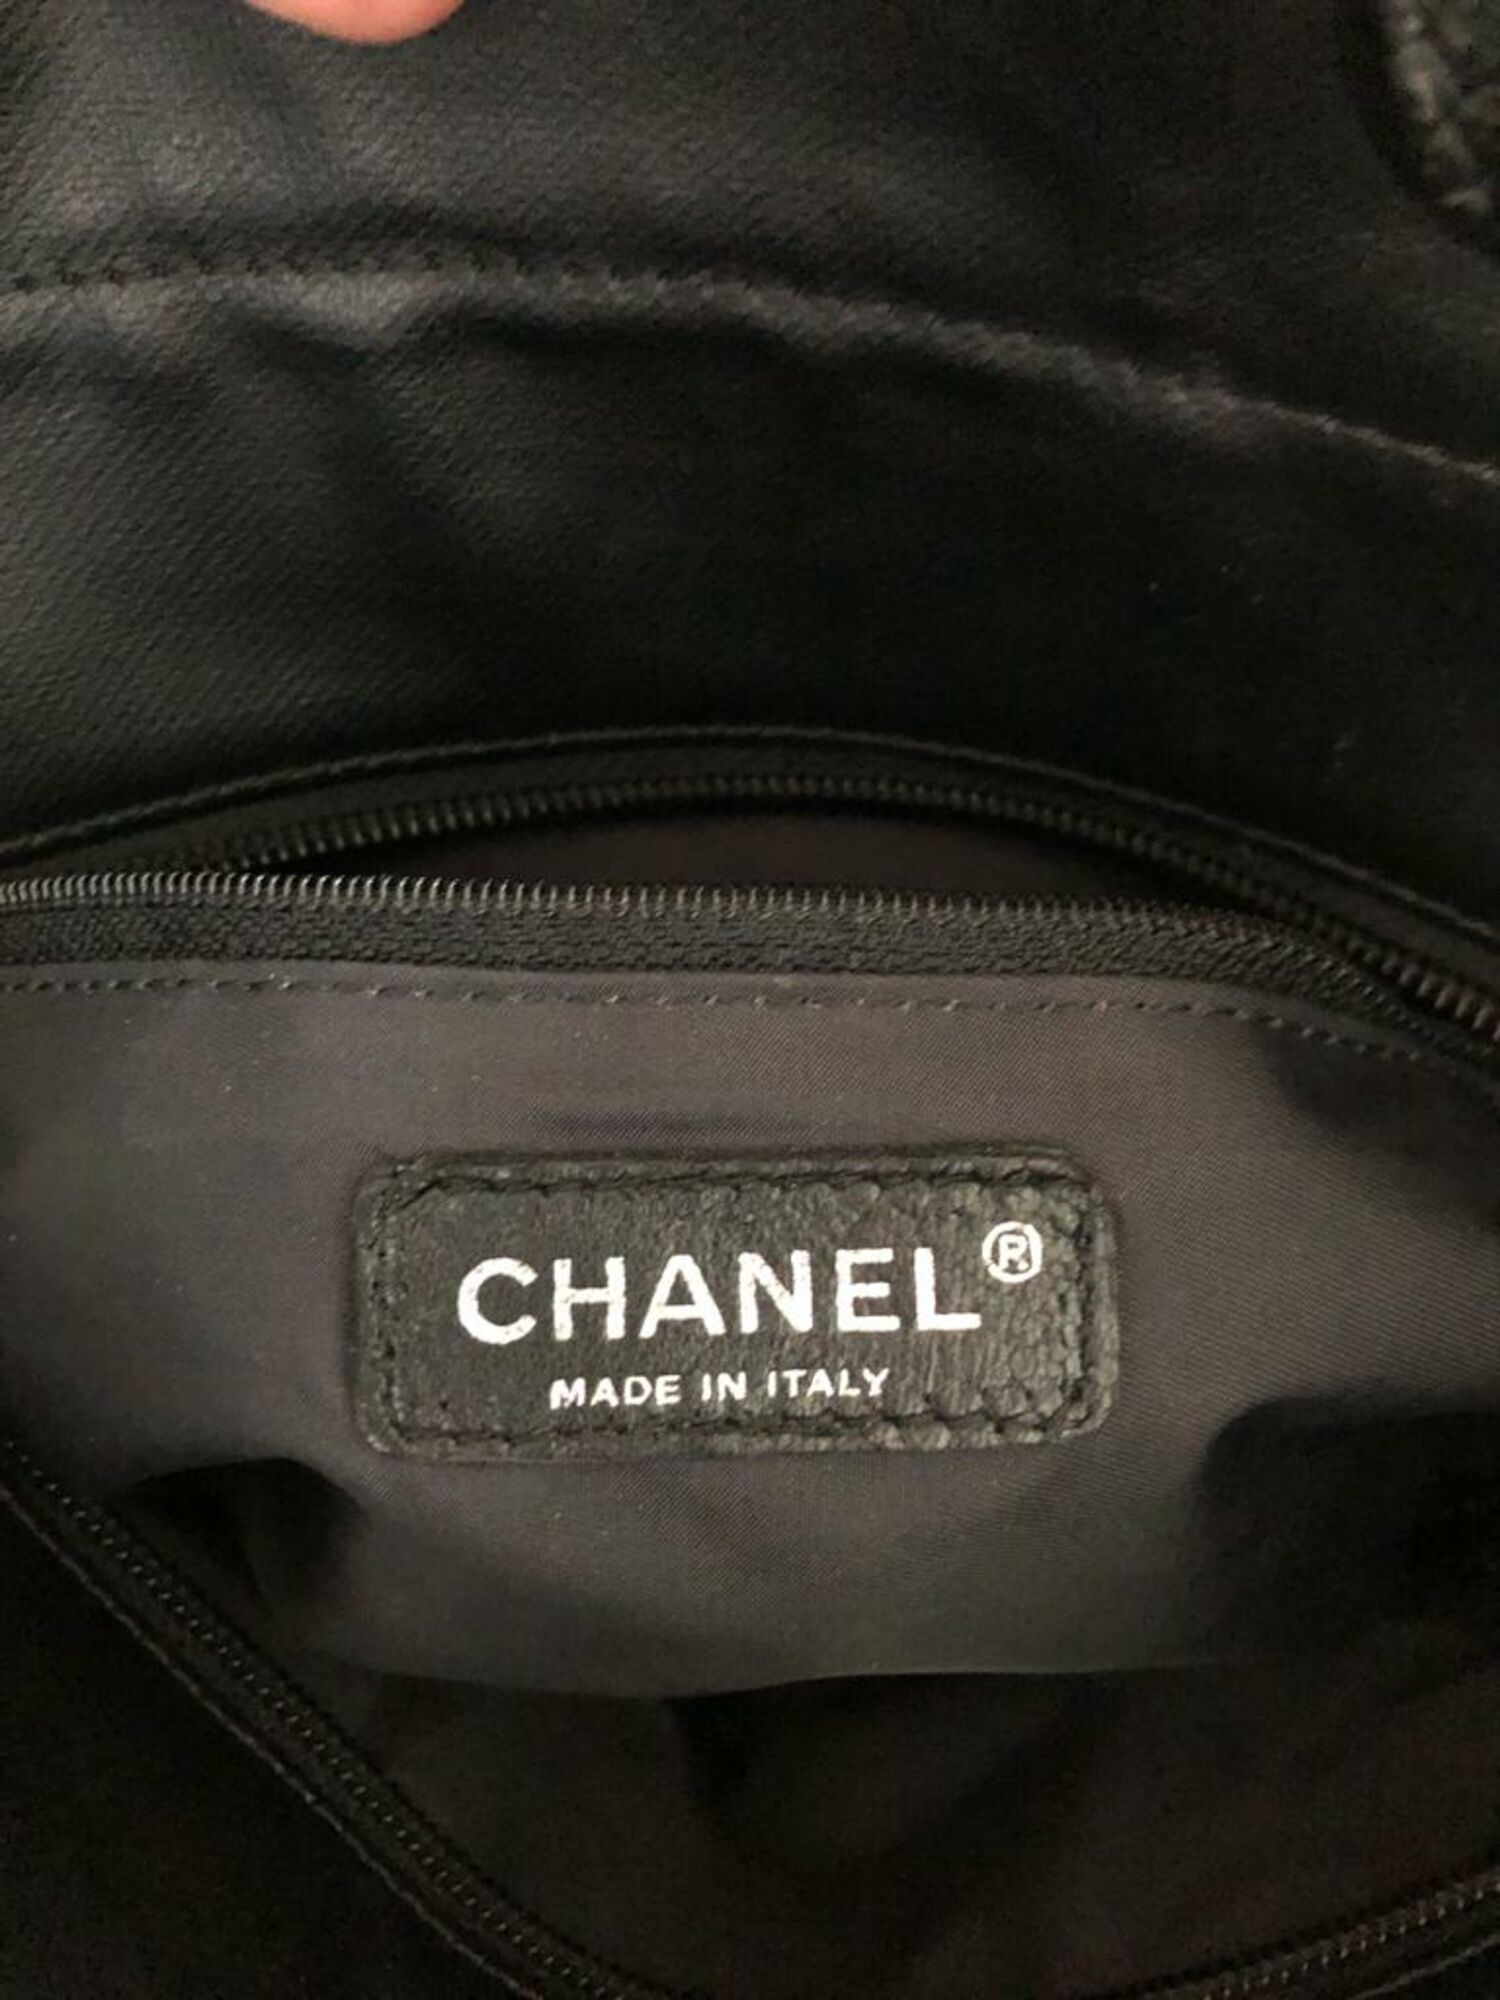 Chanel Masterclass: How to Spot a Fake Chanel Bag by Graham Wetzbarger